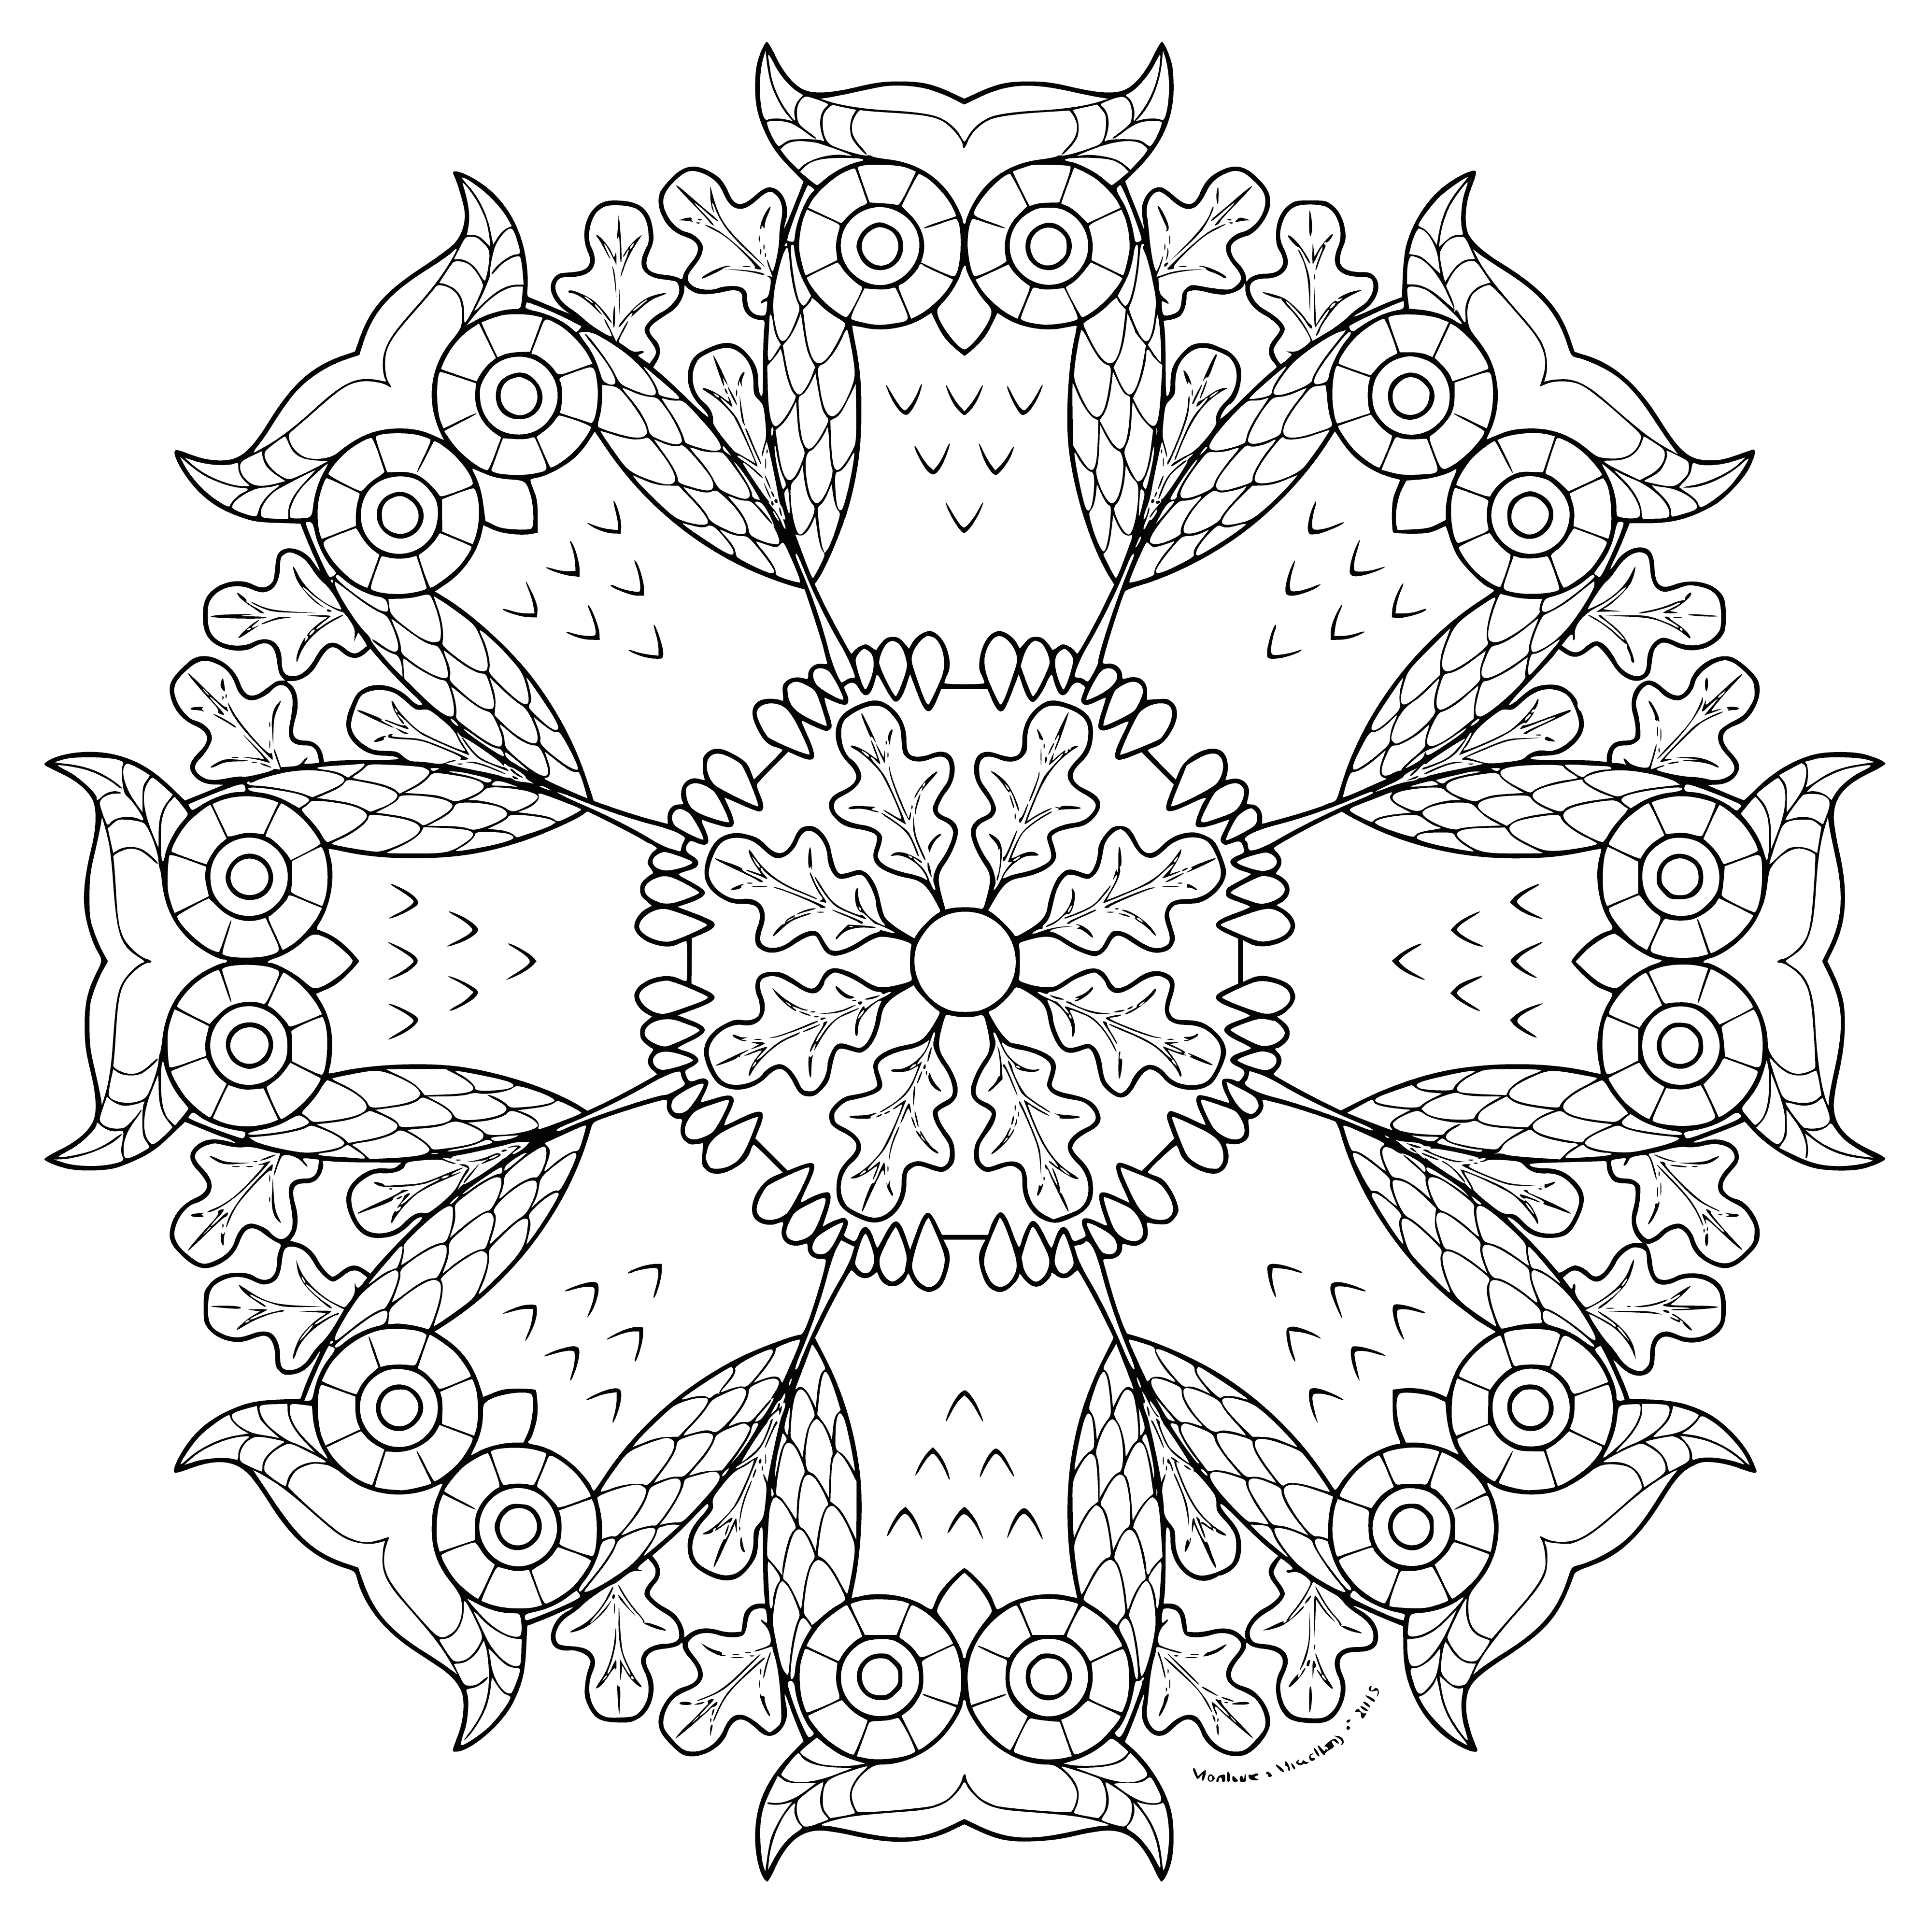 coloring page: Adorable mandala coloring page featuring owls perched on branches, intricate patterns on feathers, and color-filled background.